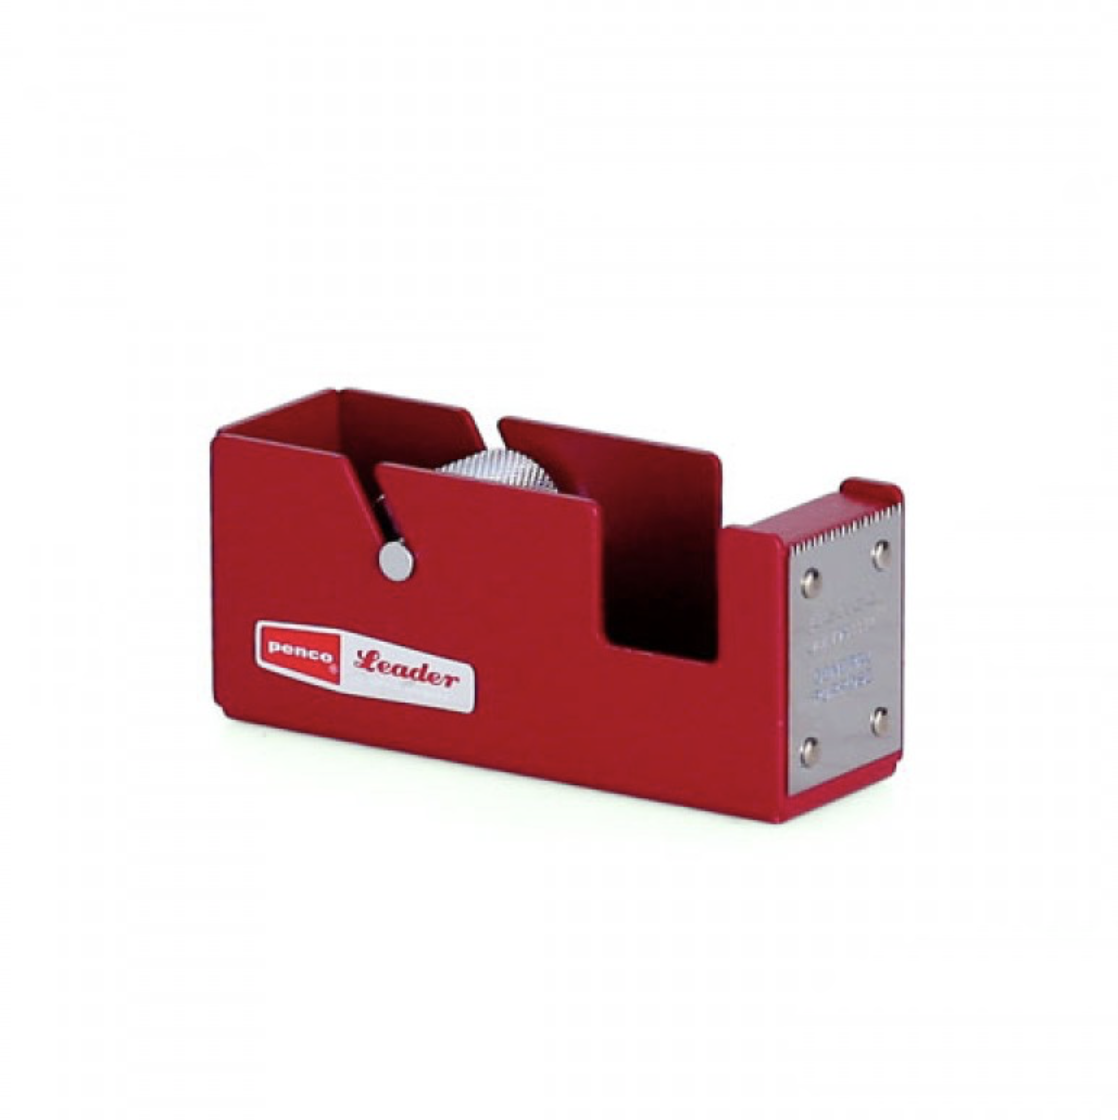 Small Tape Dispenser in Red